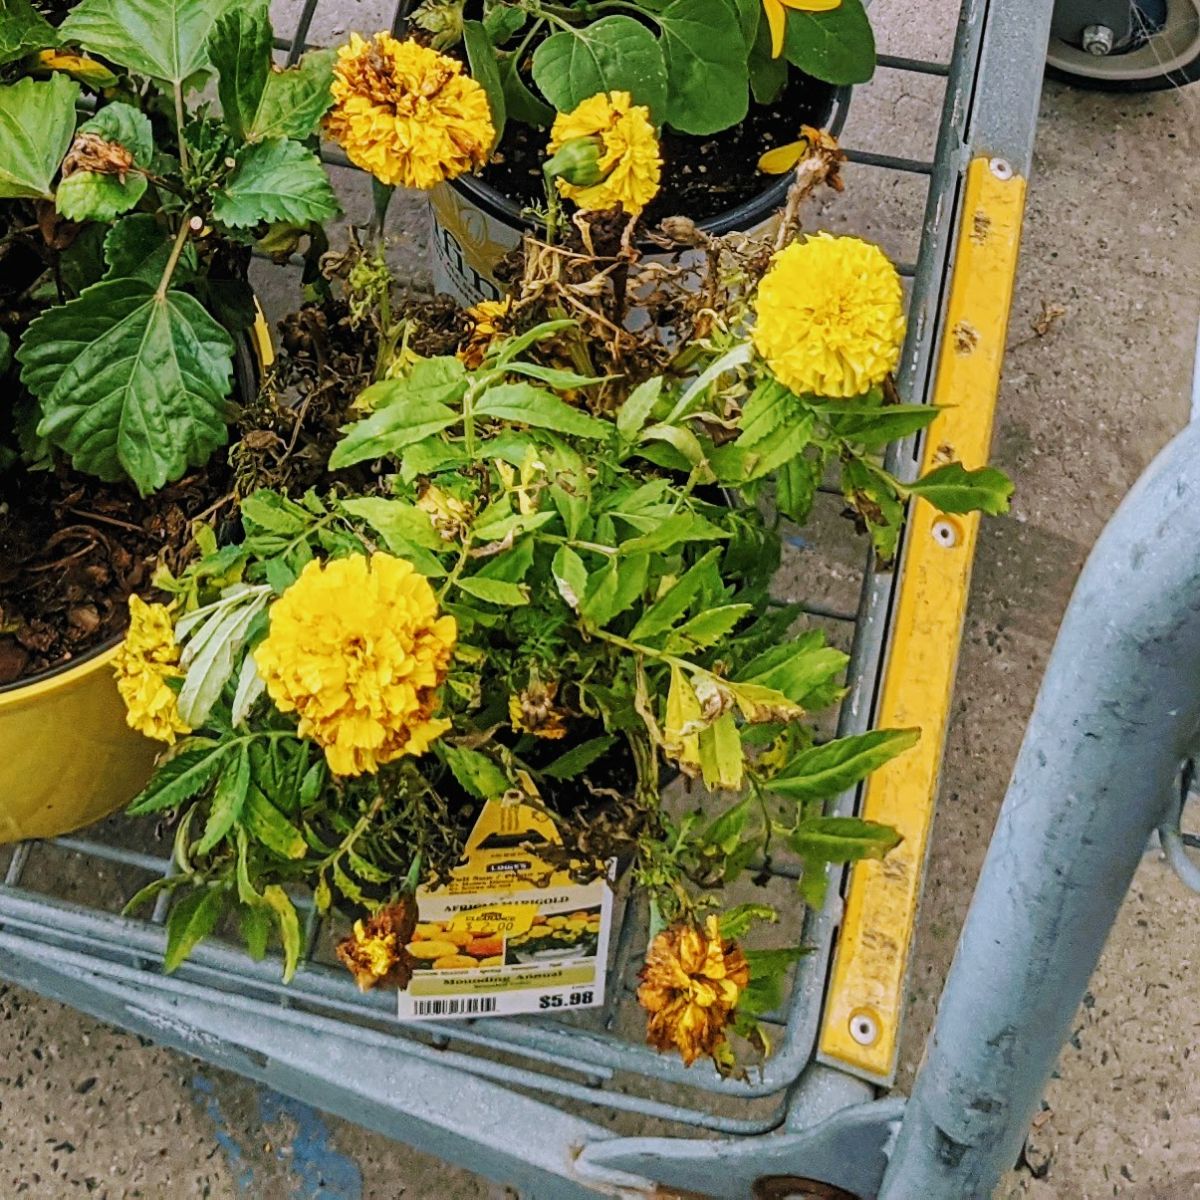 Yellow African marigolds in shopping cart at end of season clearance